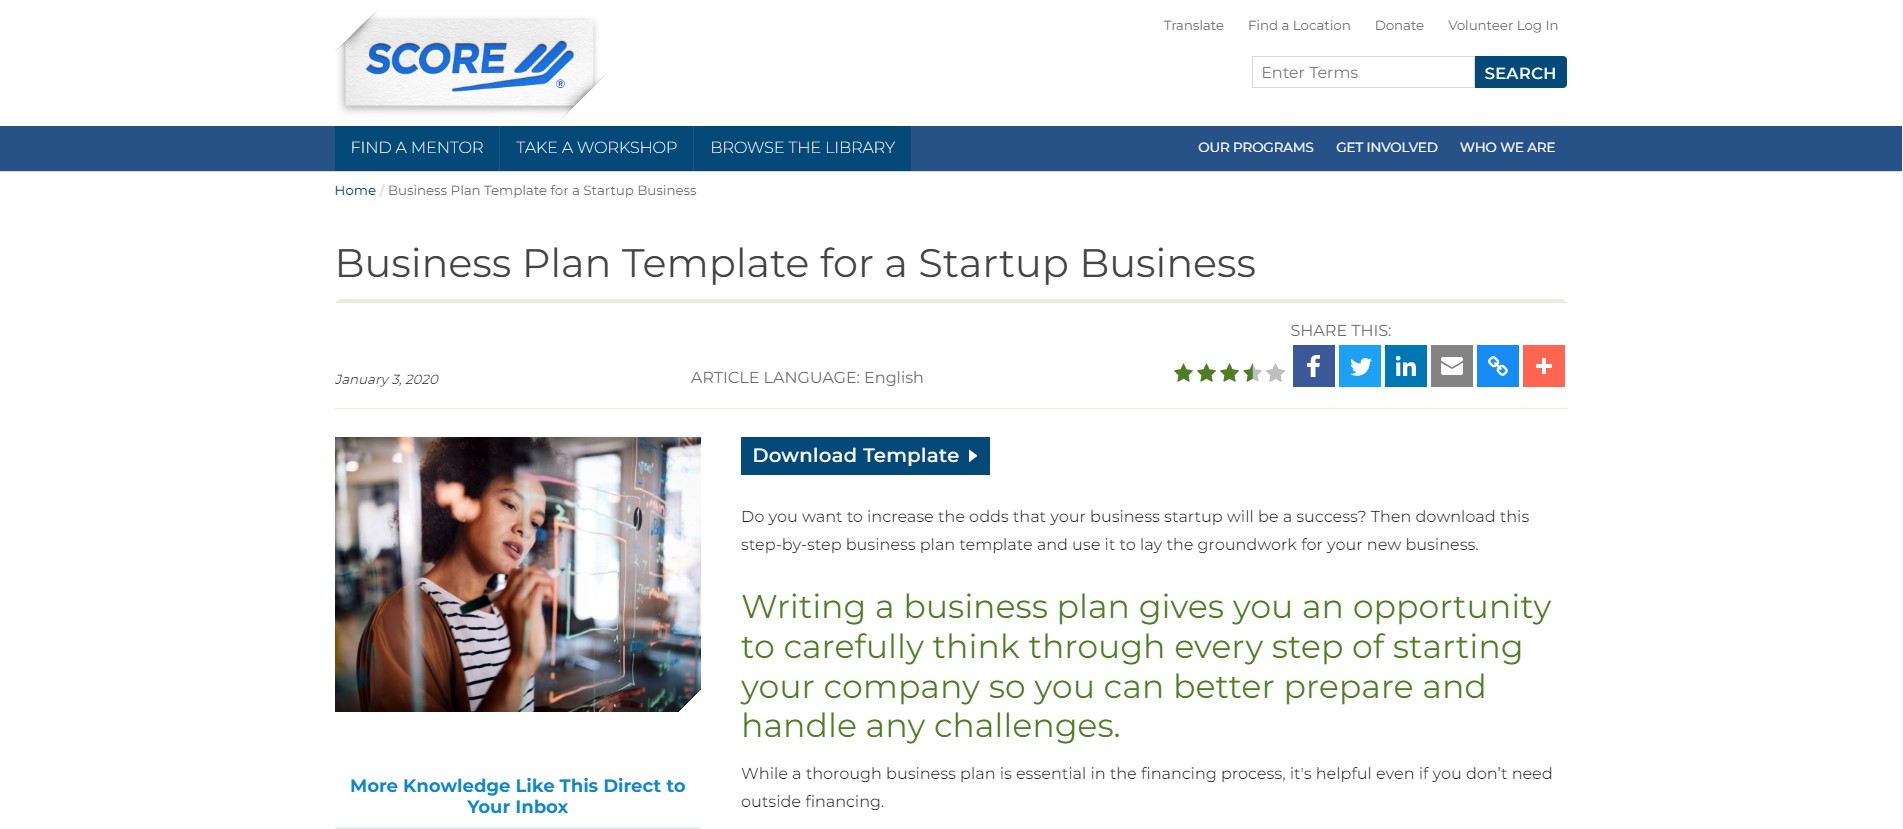 Score’s Business Plan Template for Startups